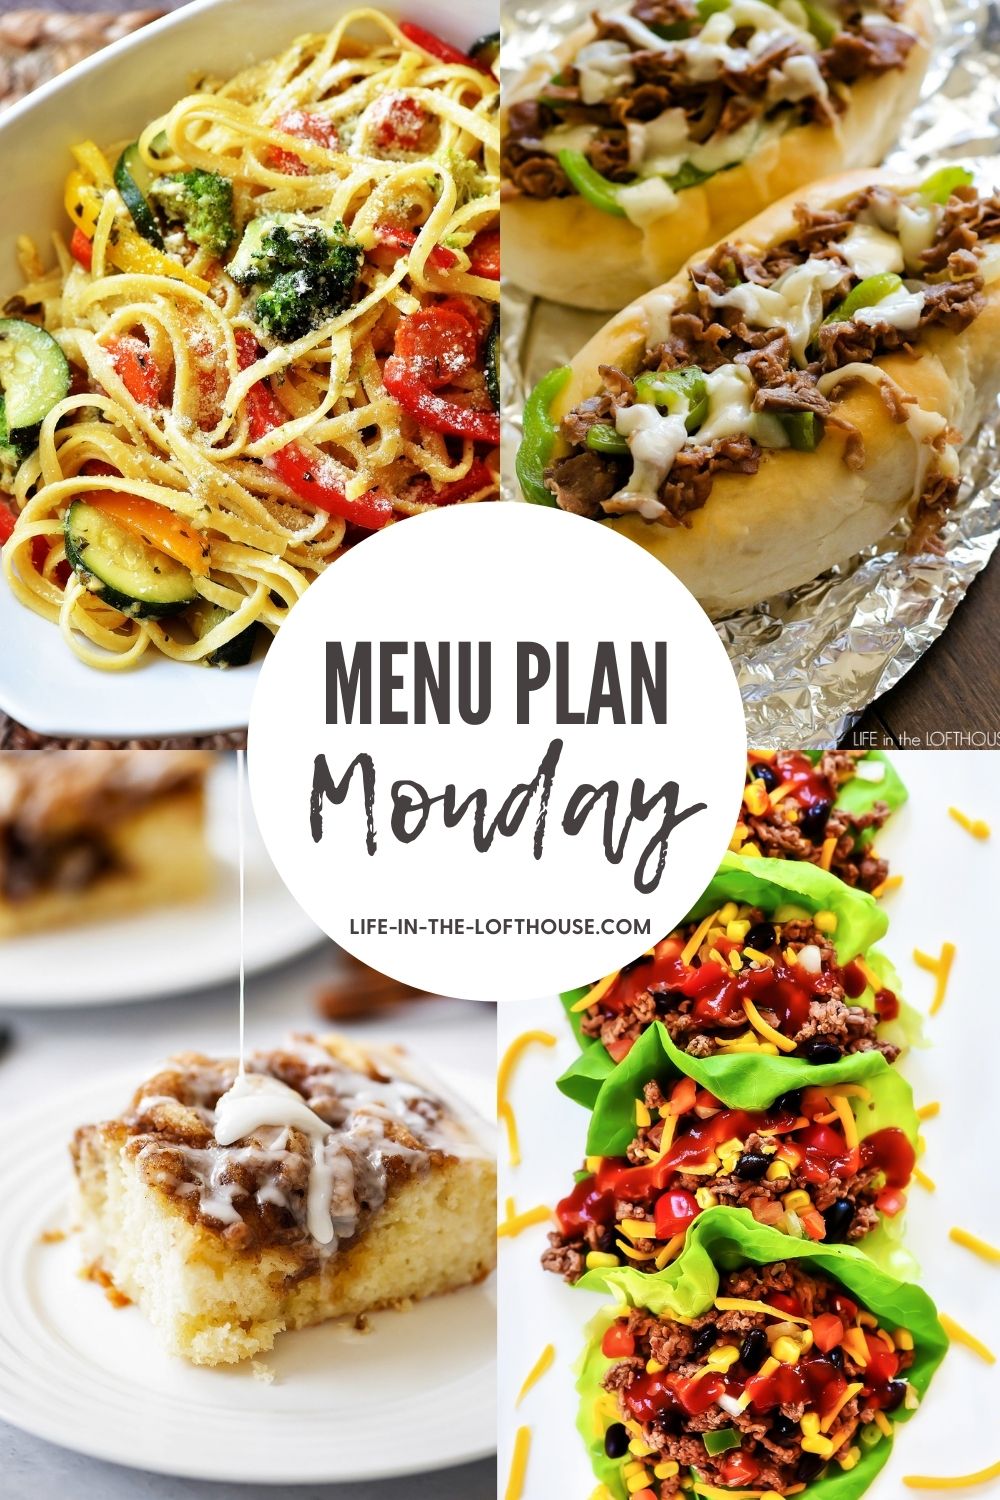 Menu Plan Monday is a weekly menu with delicious dinner recipes. All of the recipes are easy to follow and great for busy weeknights.